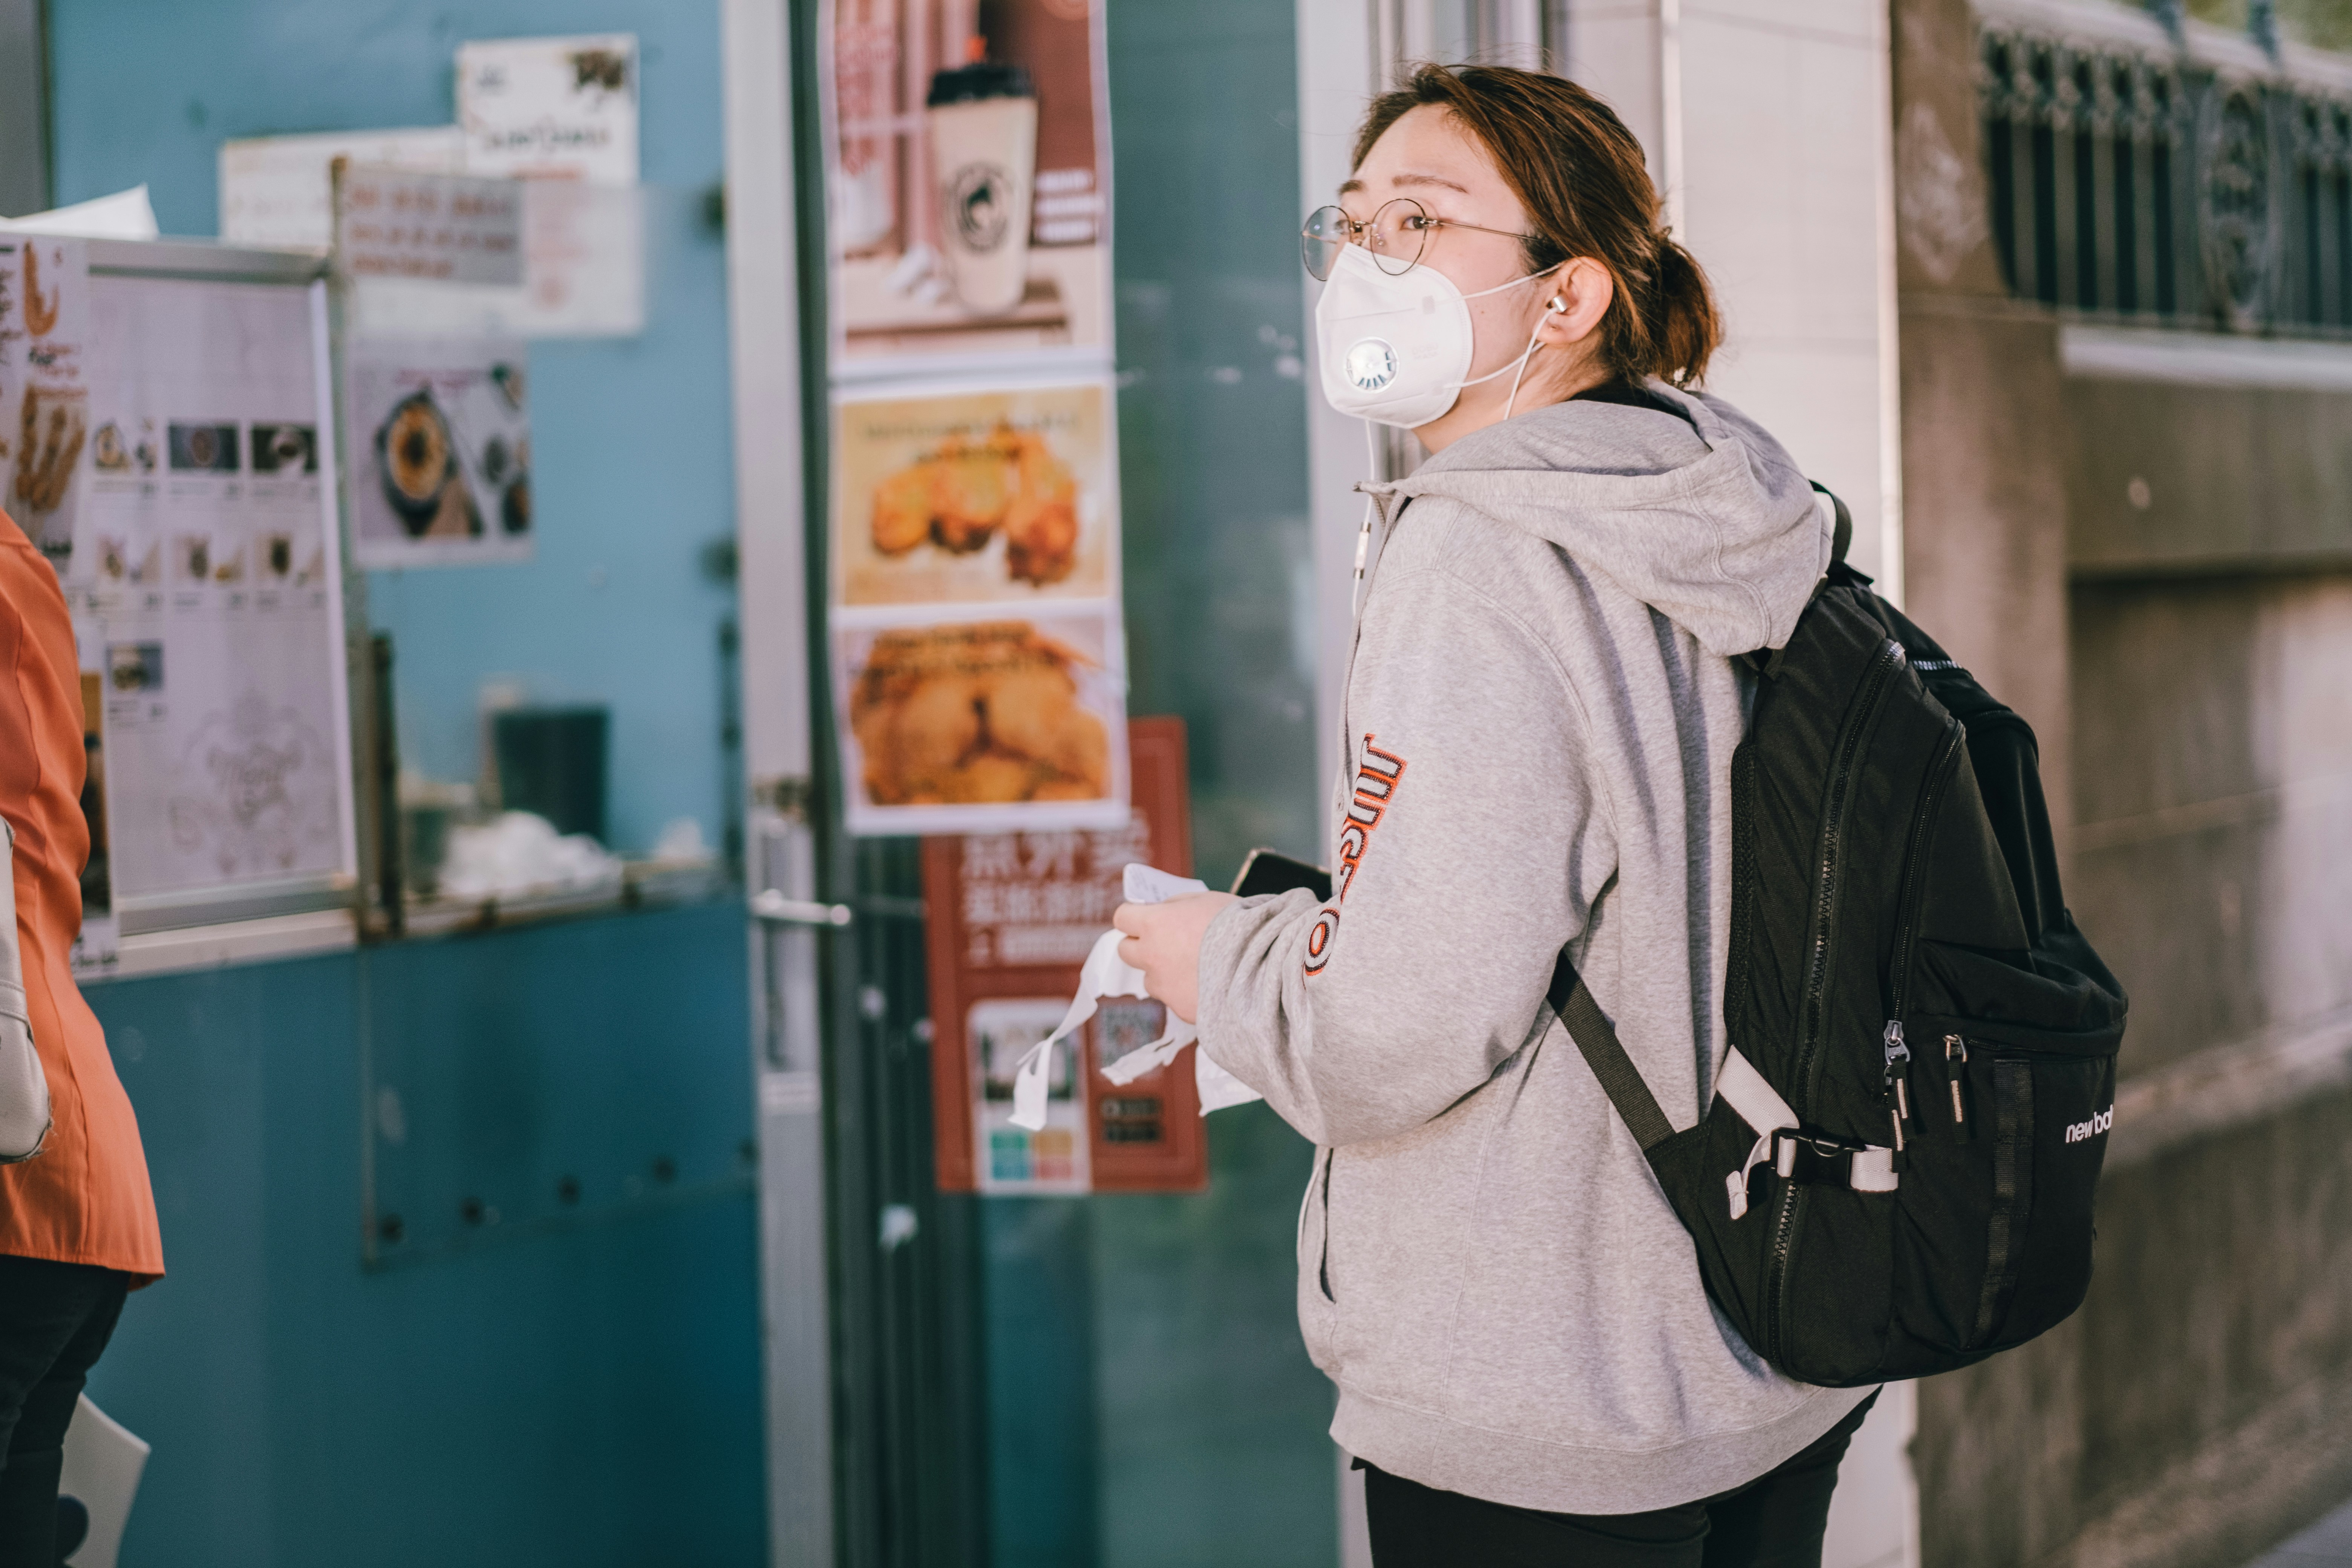 How to Help Students Overcome Pandemic Learning Loss